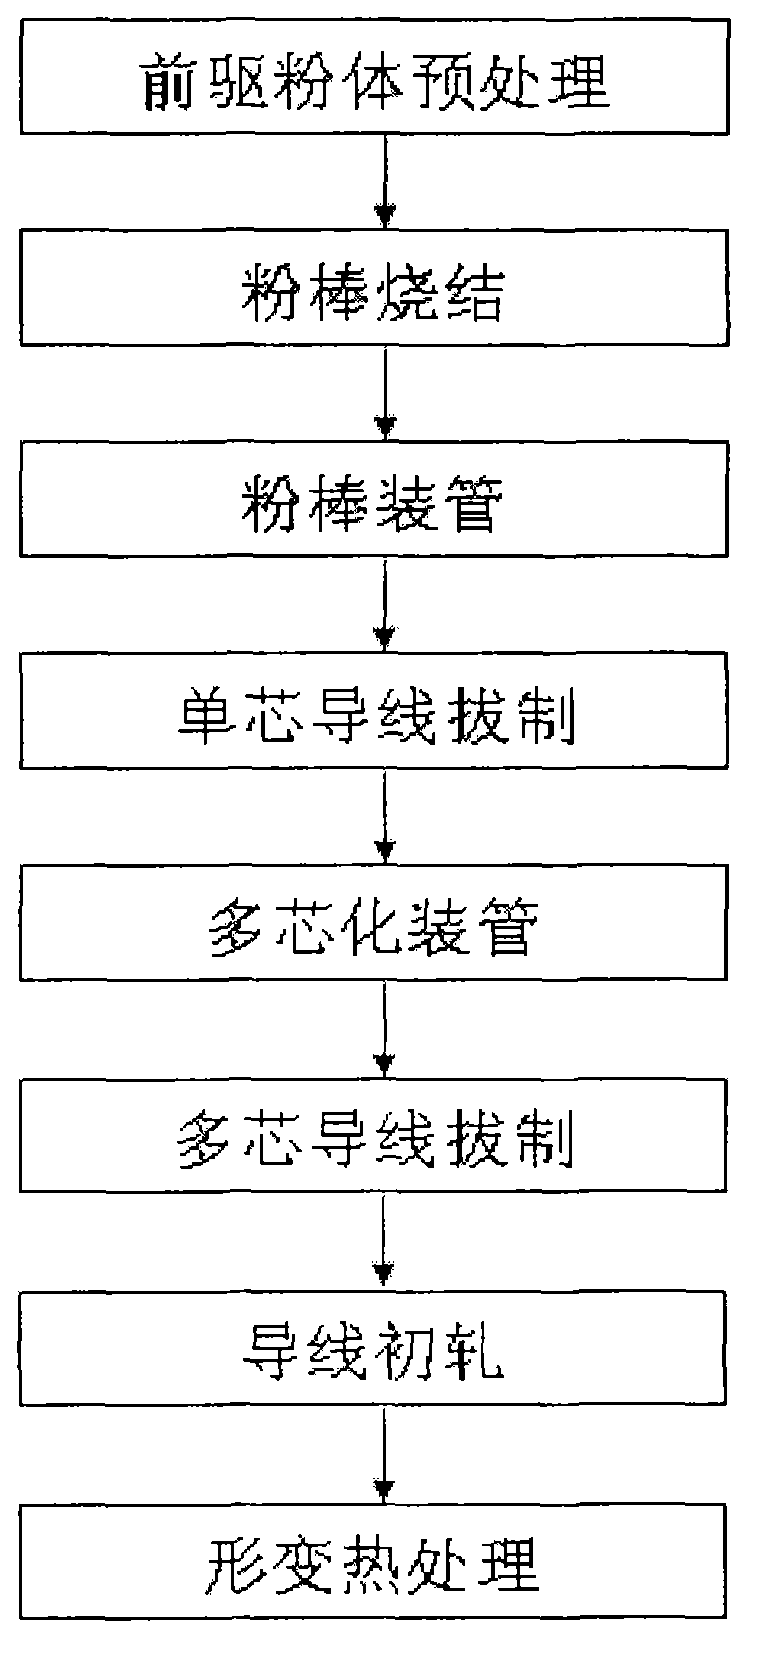 A sintering method for an oxide superconducting powder rod and a method for preparing a superconducting wire rod by using the powder rod sintered by using the sintering method